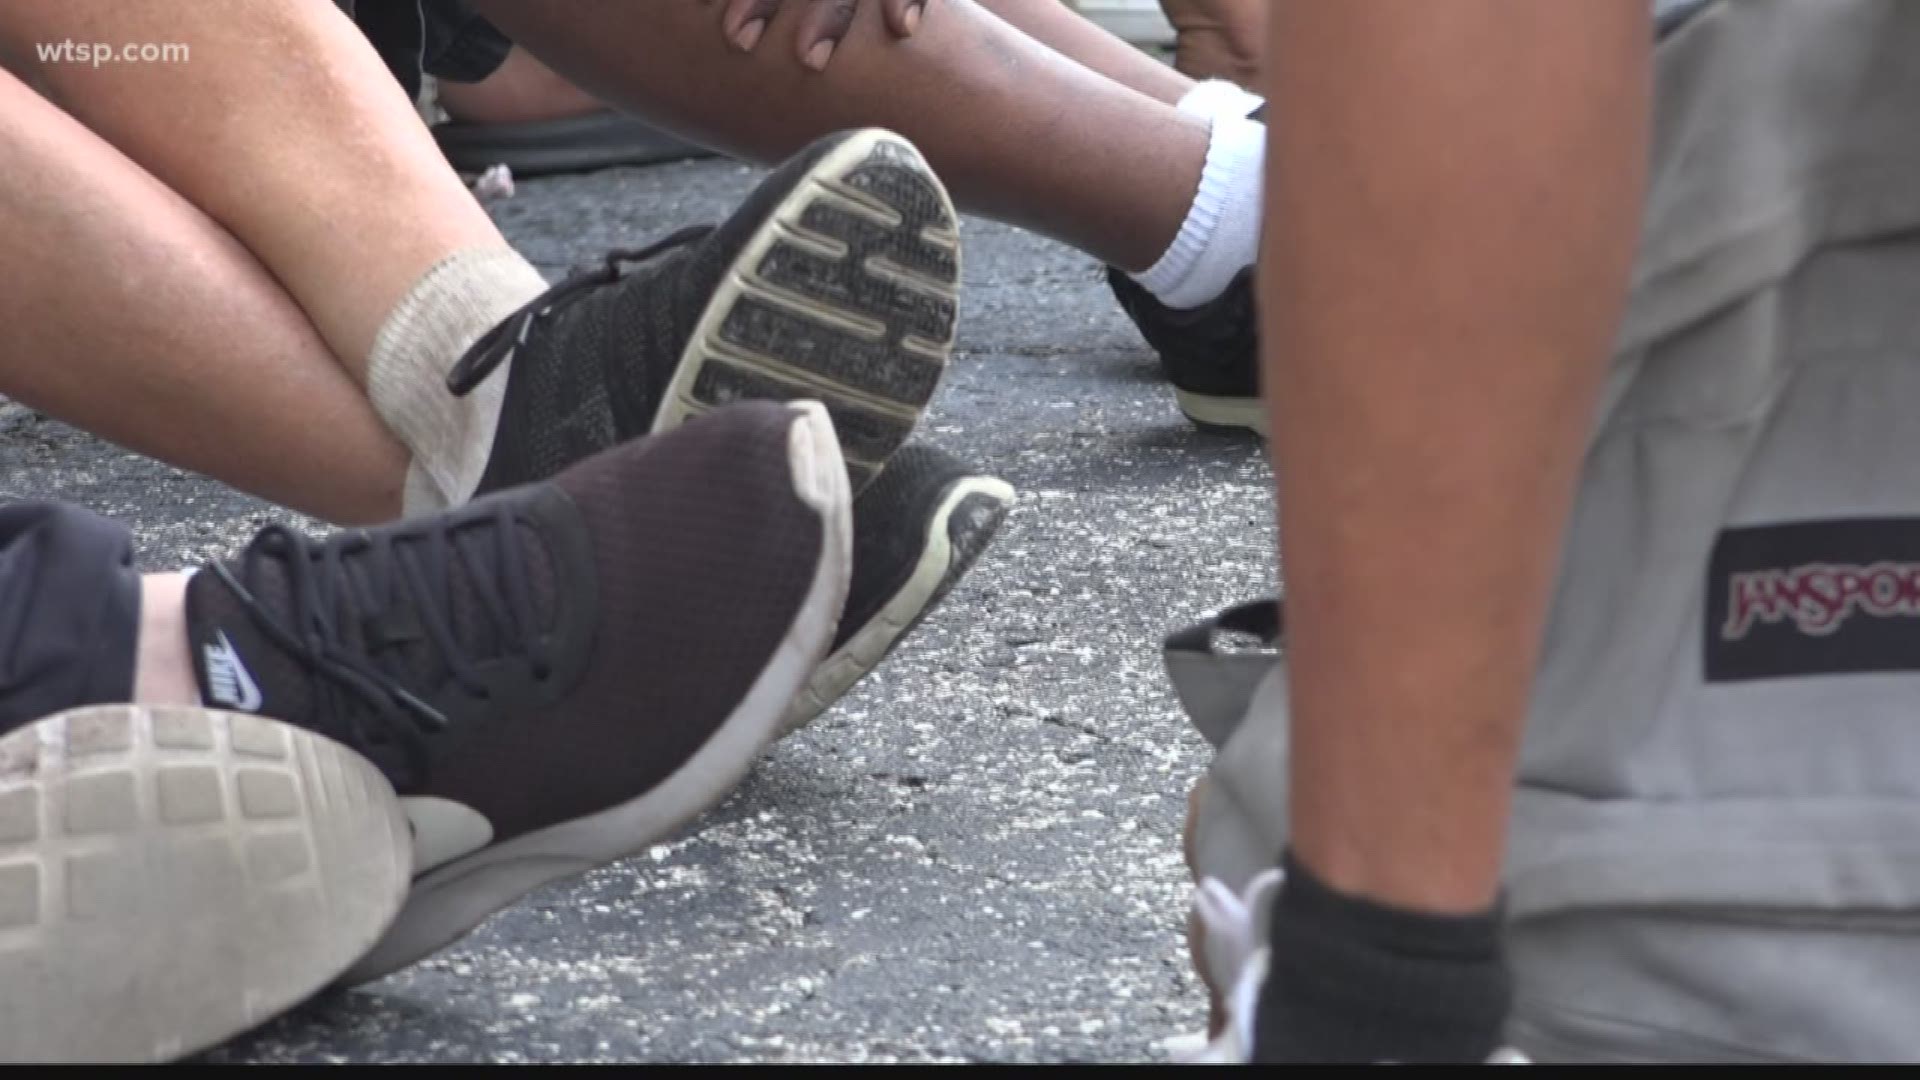 In addition to pizza, toiletries and haircuts, homeless men and women come to the same area each weekend to converse. The one-on-one connections built with caring volunteers have fostered a feeling of trust between everyone involved with the outreach. https://on.wtsp.com/2GqPWfn